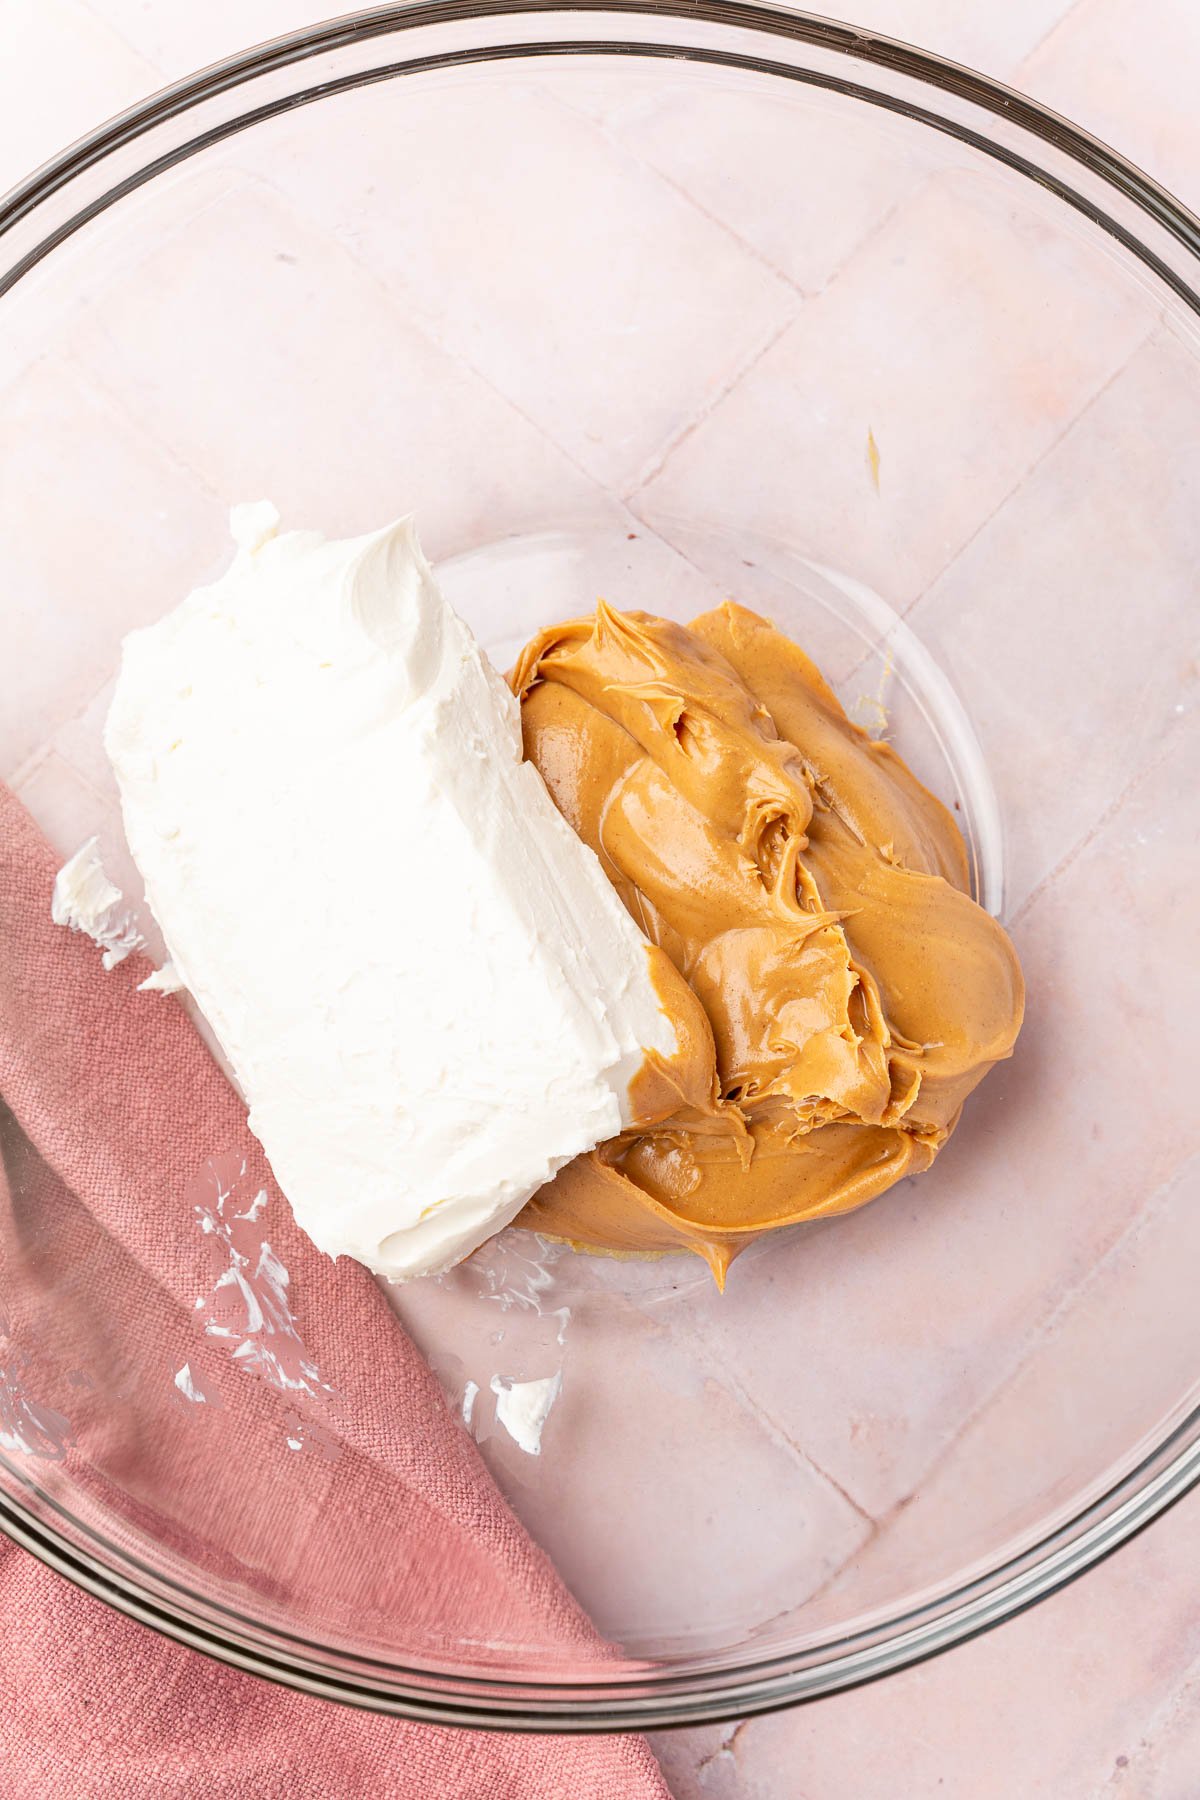 Cream cheese and peanut butter in a glass mixing bowl before mixing together.